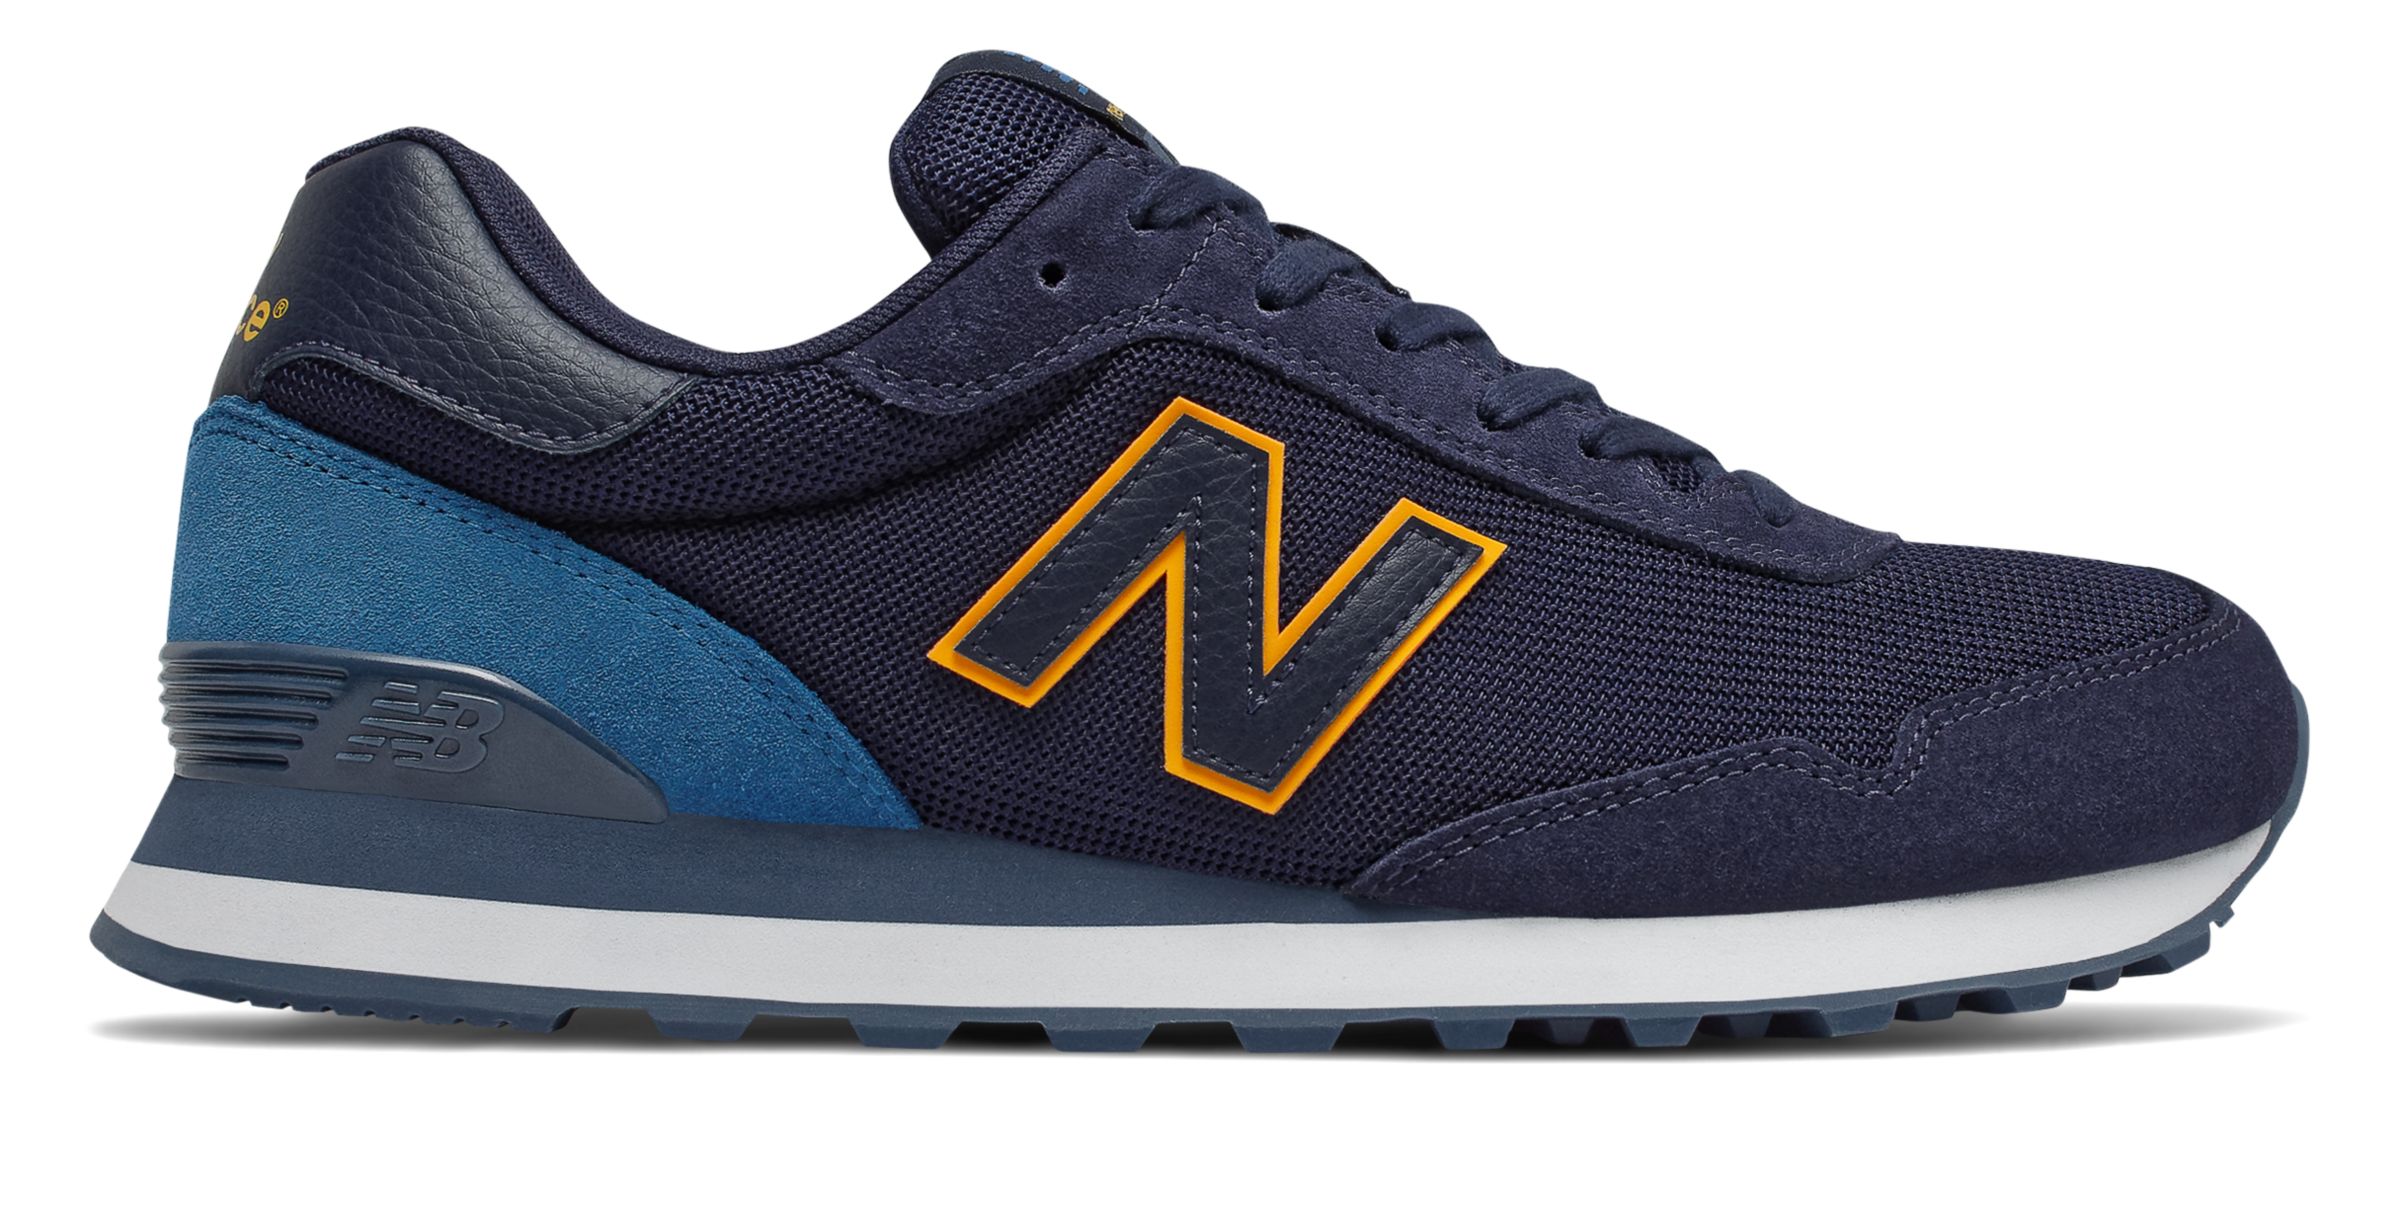 New Balance Men's 515 Shoes Blue with Blue & Yellow | eBay